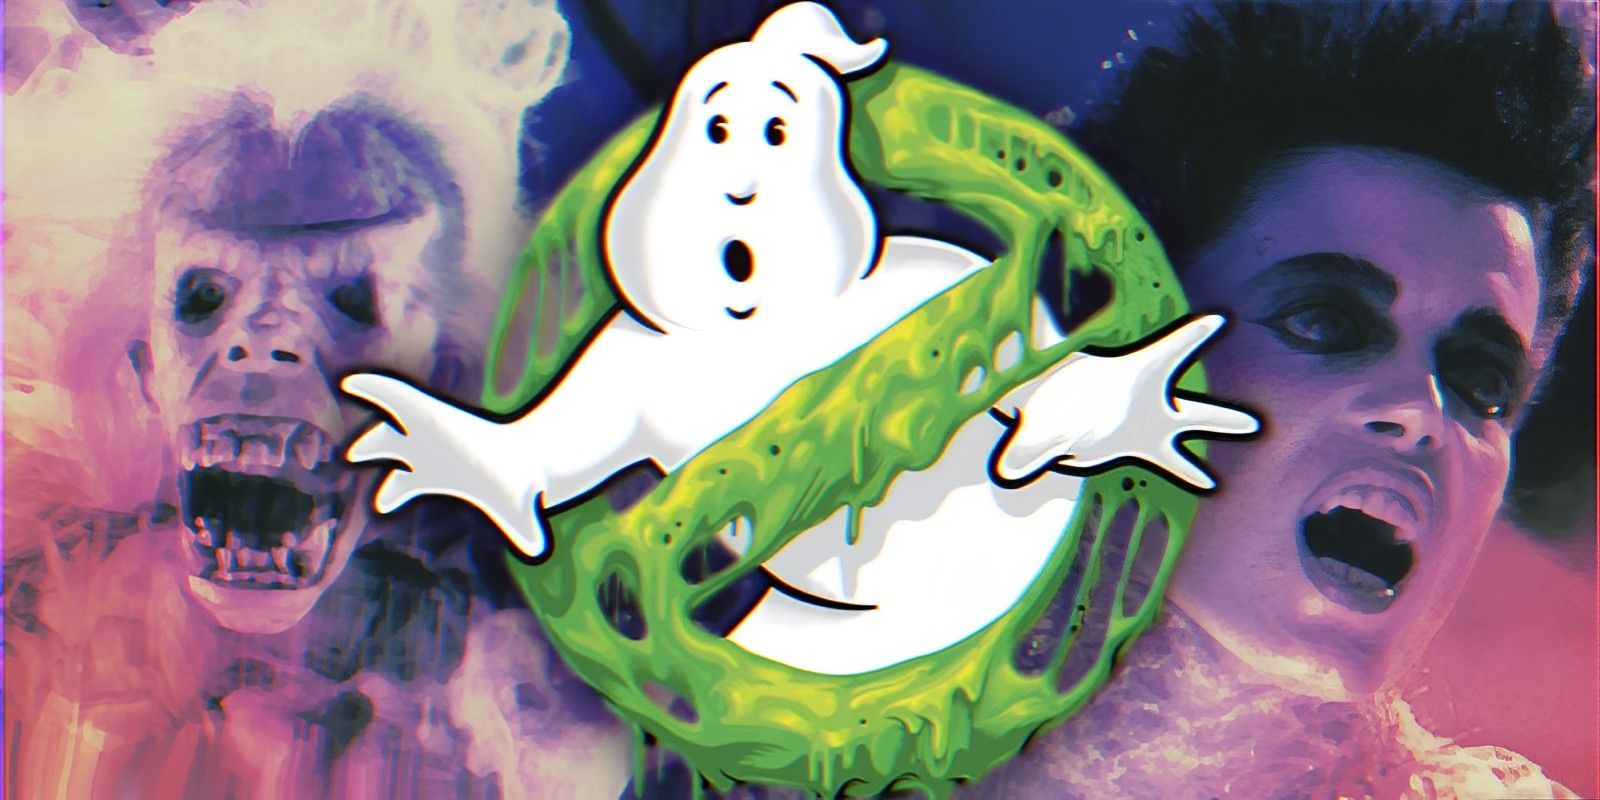 Ghostbusters green slime and ghost logo alongside library ghost screaming and Gozer